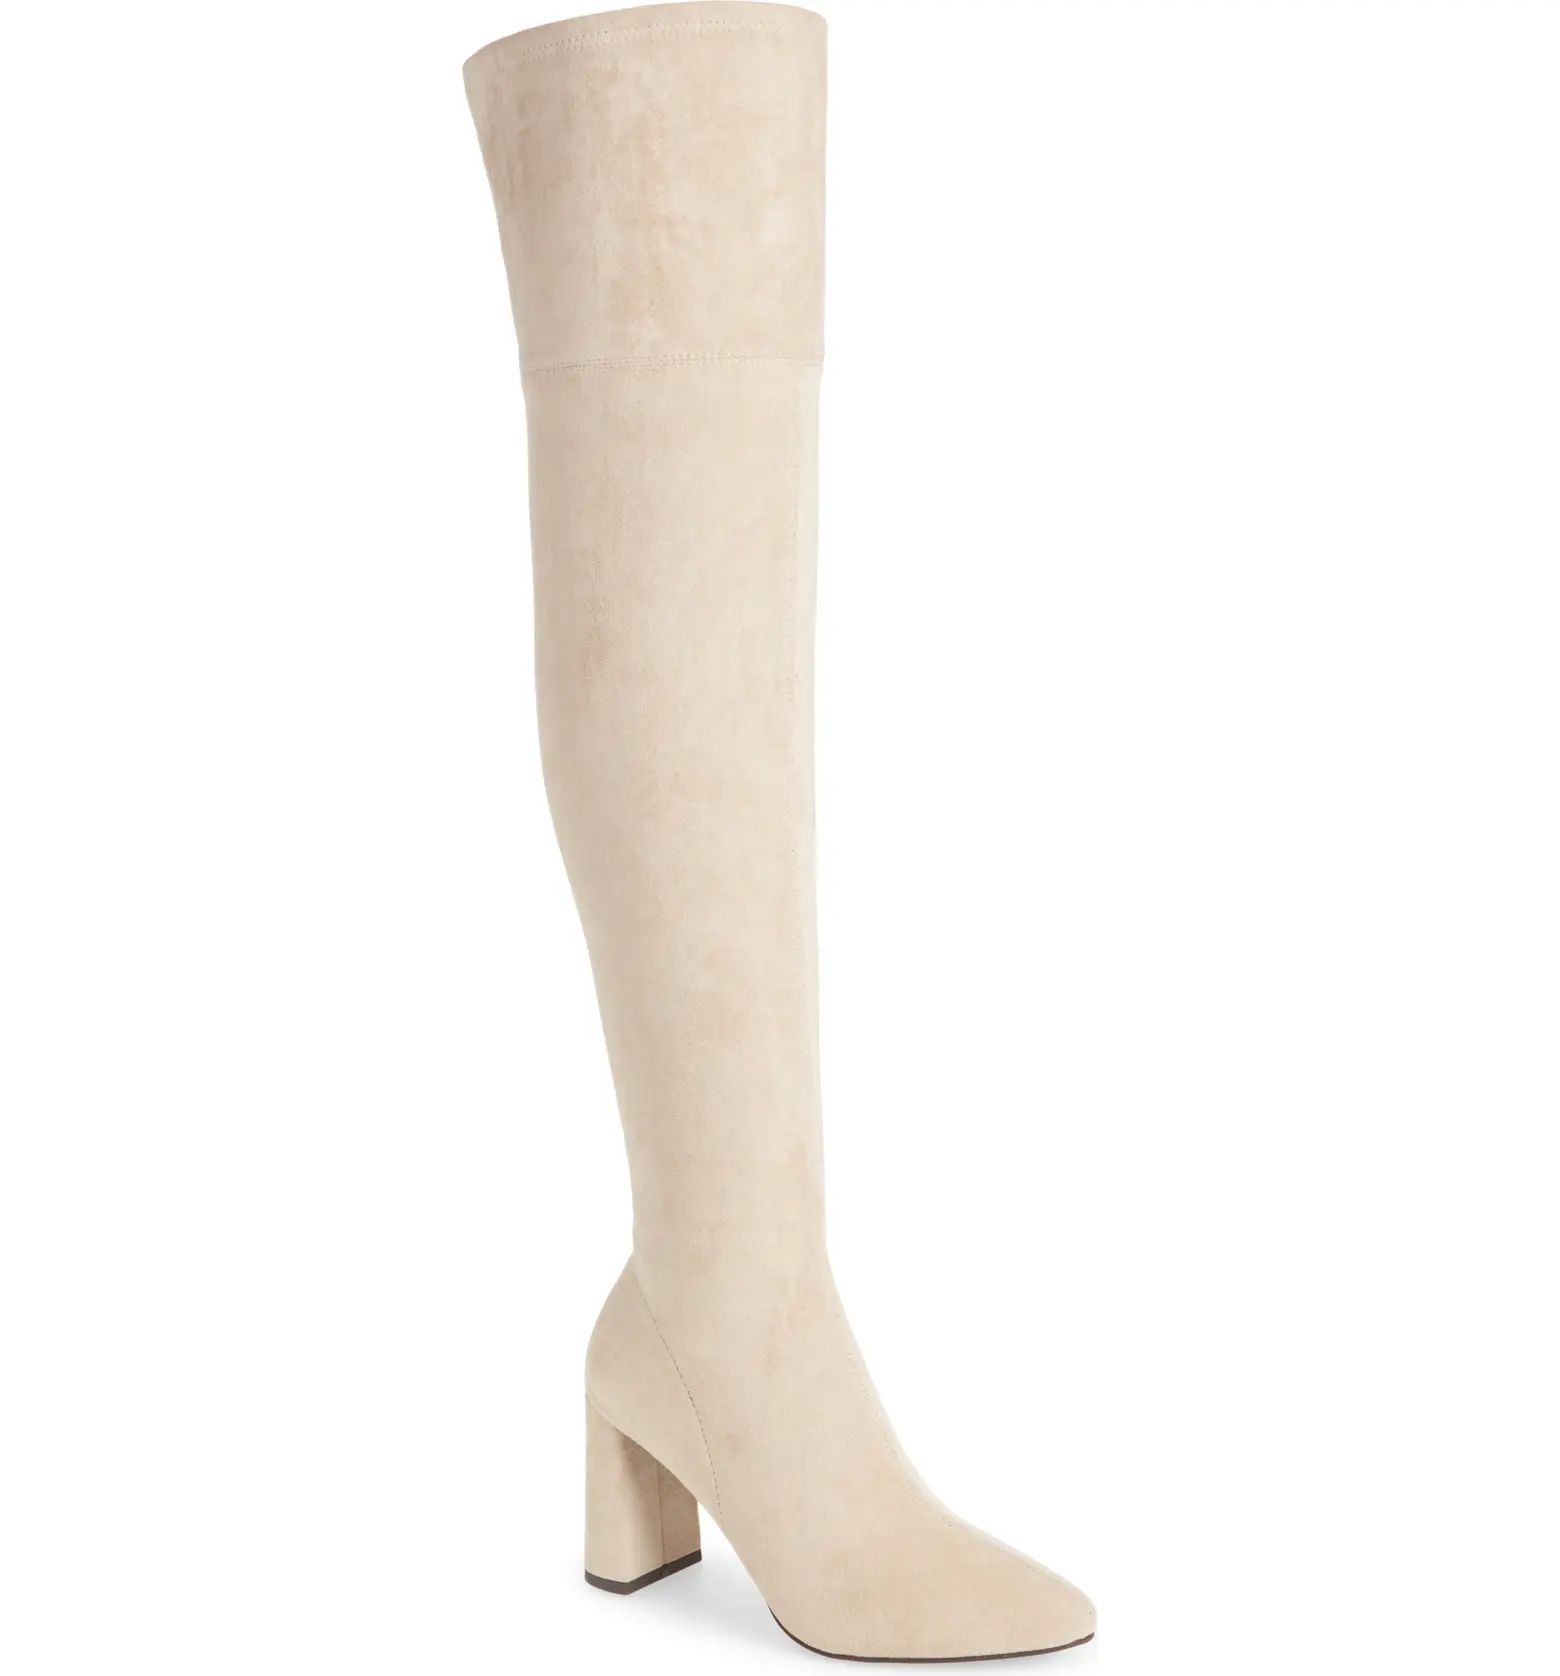 Parisah Over the Knee Boot | Nordstrom